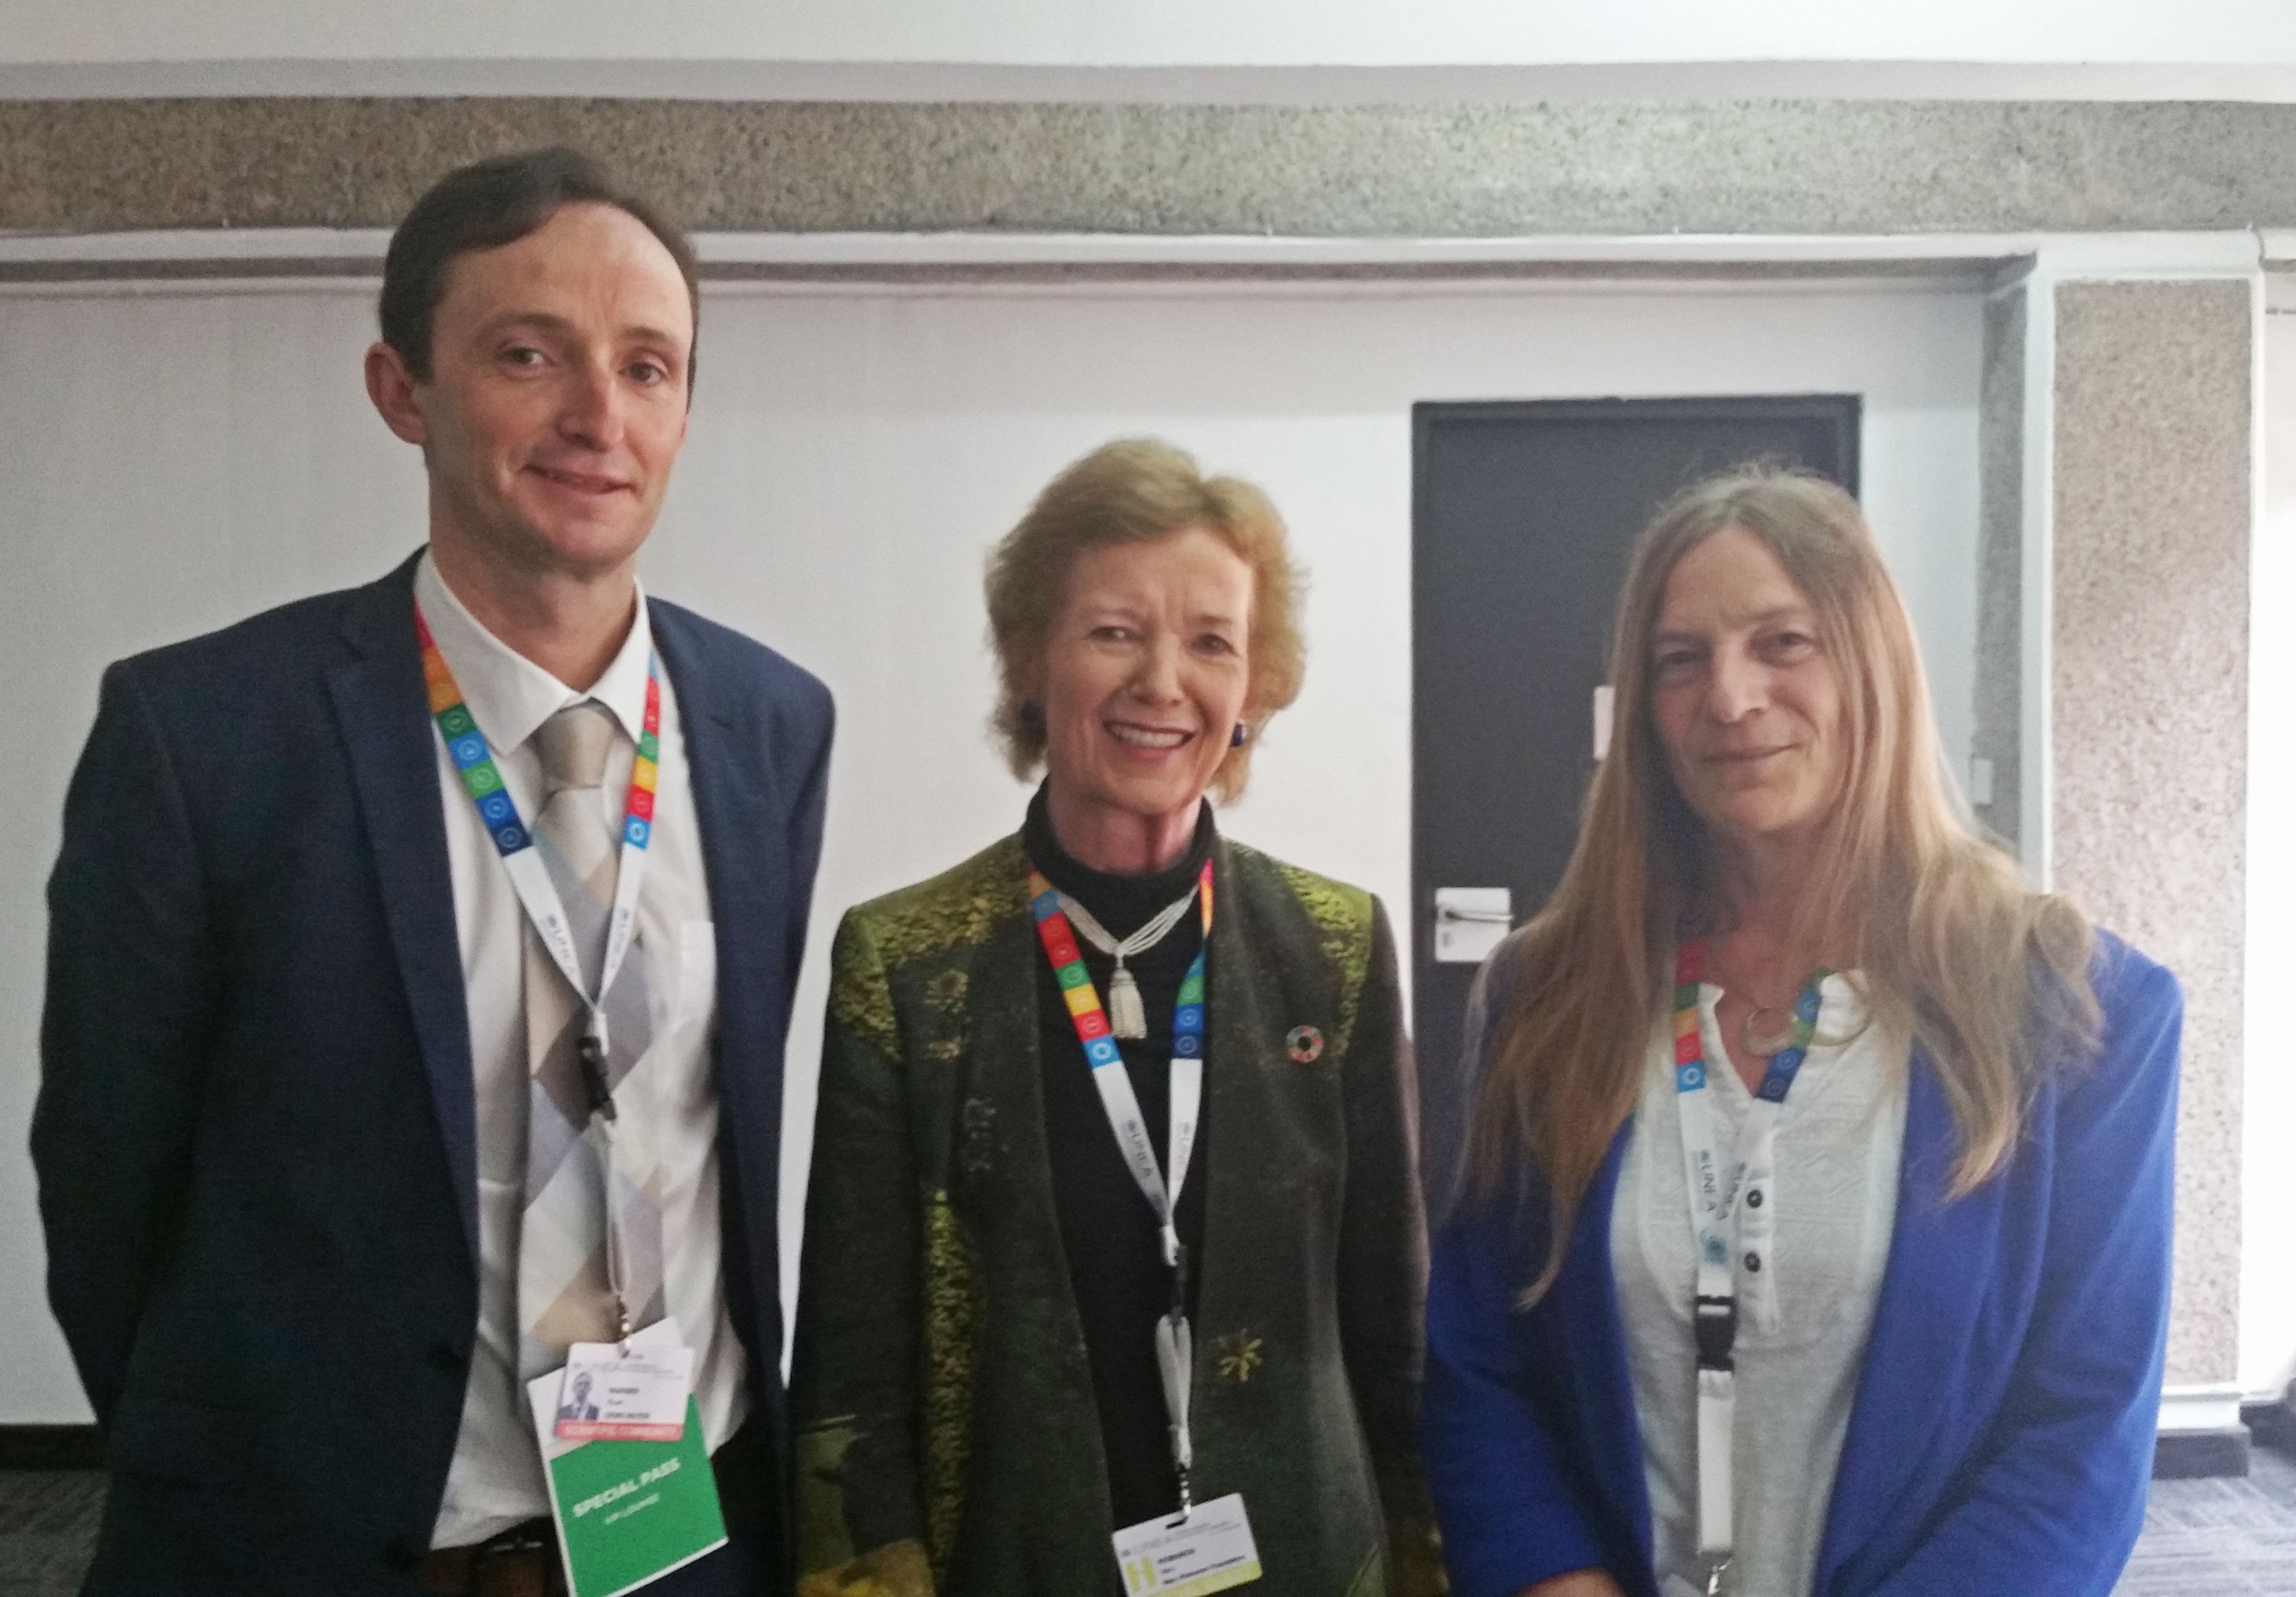 Stuart Warner and Dr. Debbie Chapman with Mary Robinson at UNEA 2016